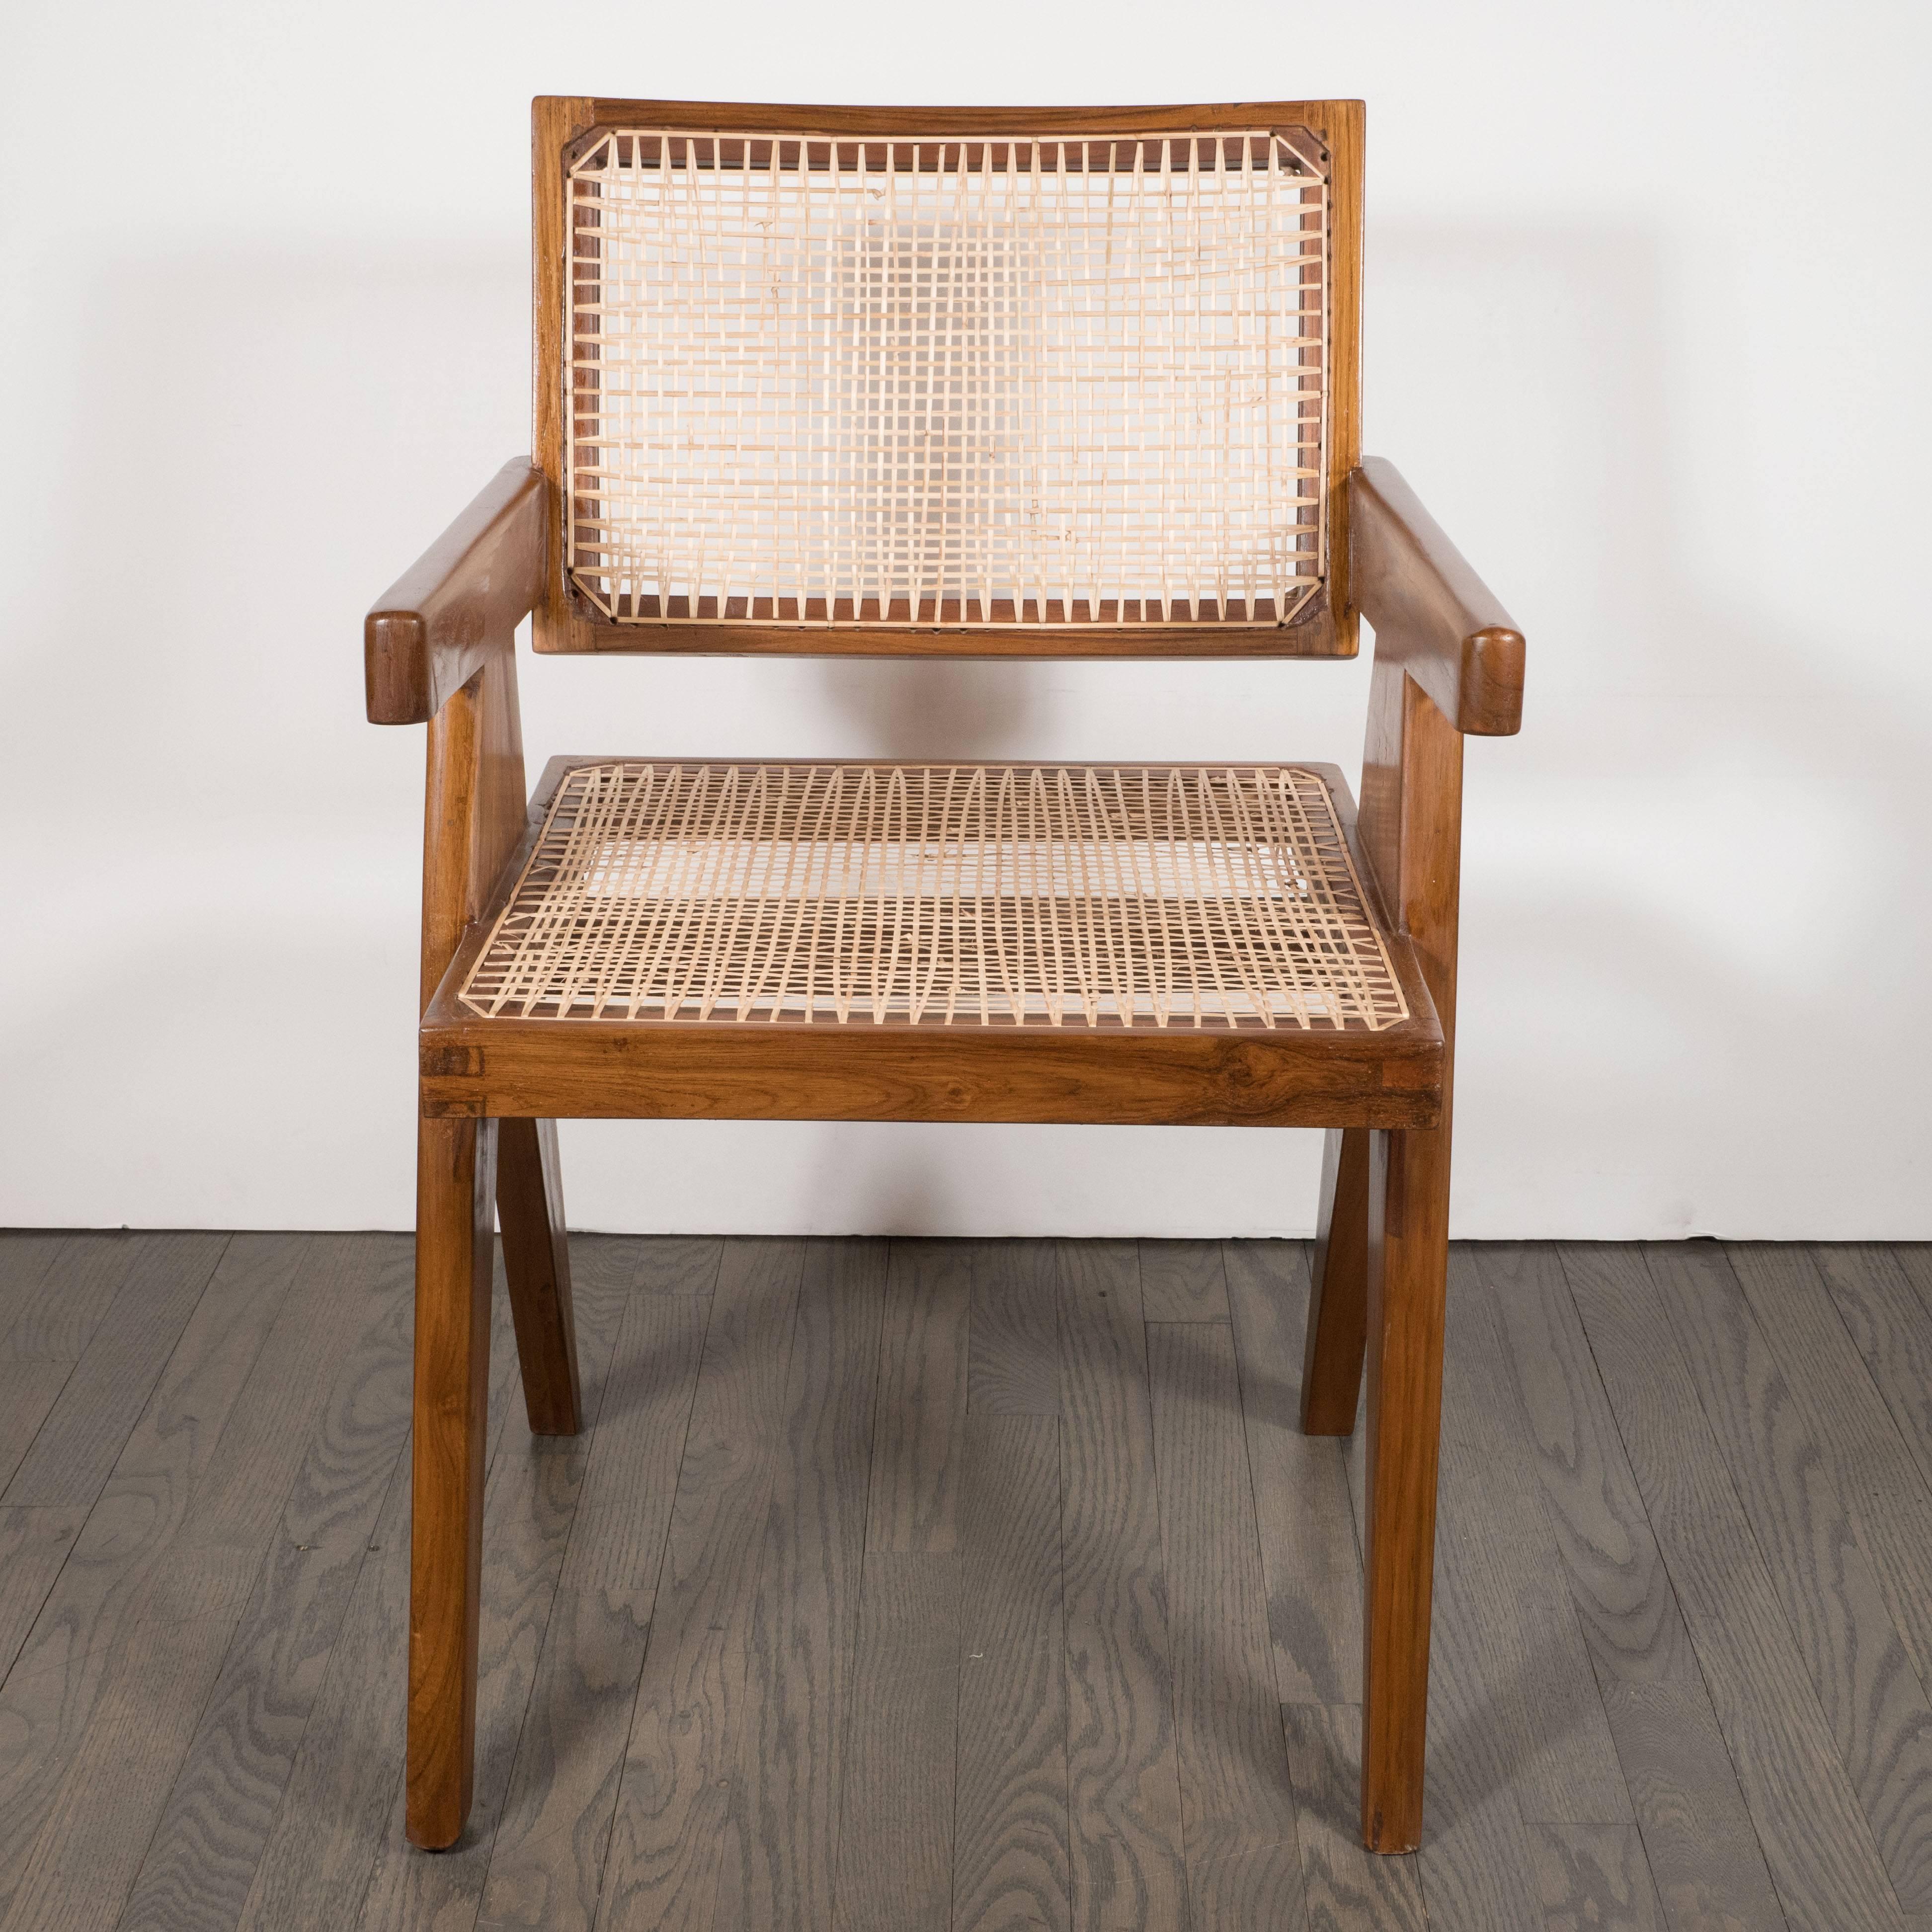 Indian Pair of Armchairs in Teak, Caning and Upholstery by Pierre Jeanneret